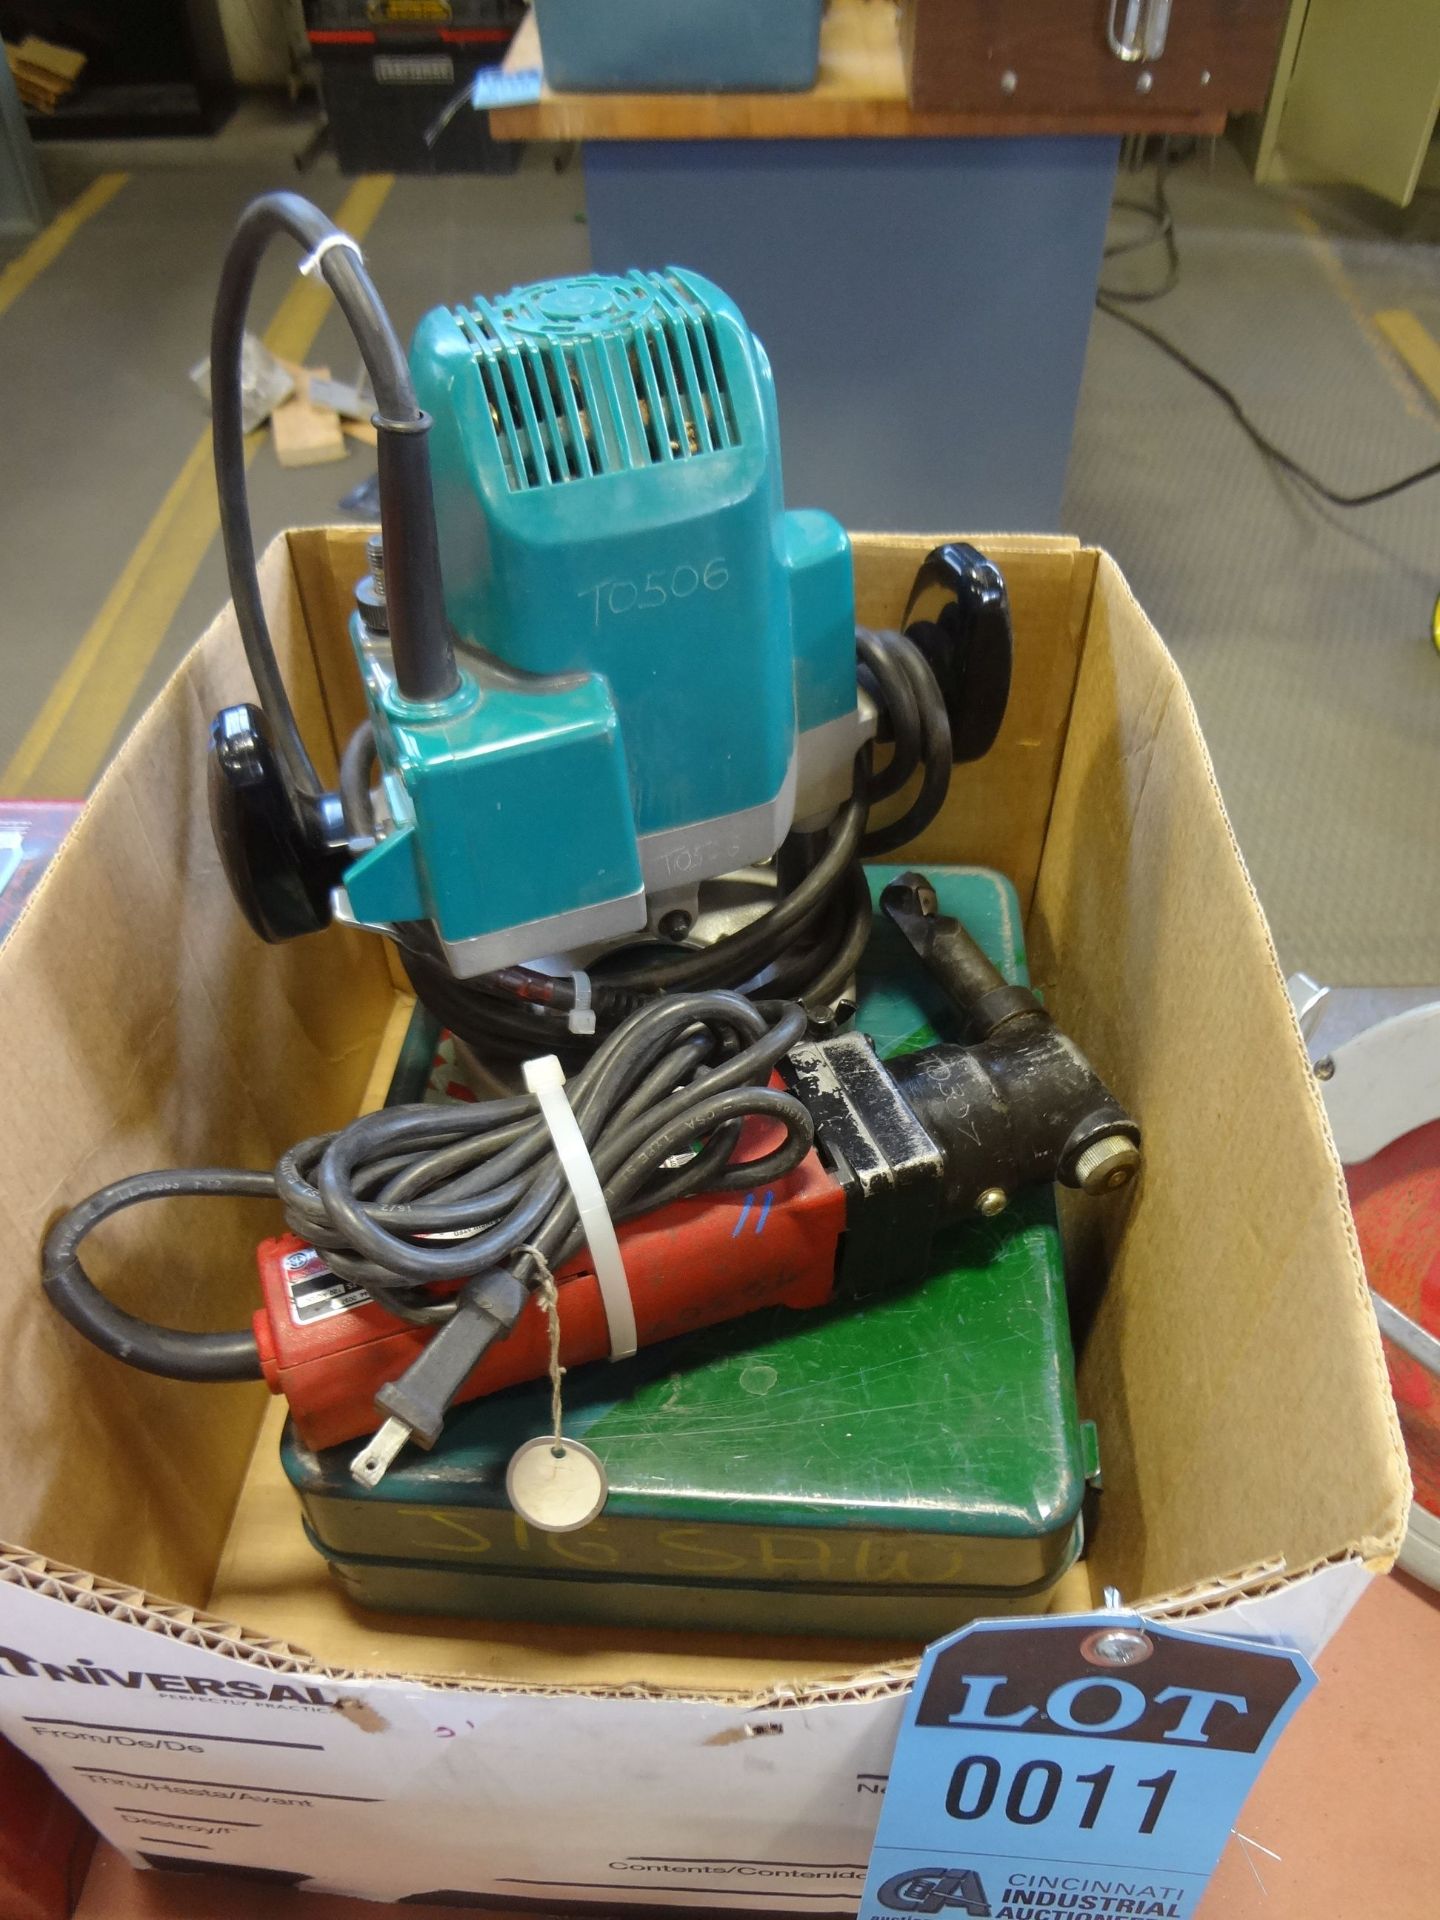 (LOT) MISCELLANEOUS ELECTRIC POWER TOOLS WITH MAKITA MODEL 3612BR ROUTER, MILWAUKEE 16 GA. NIBBLER